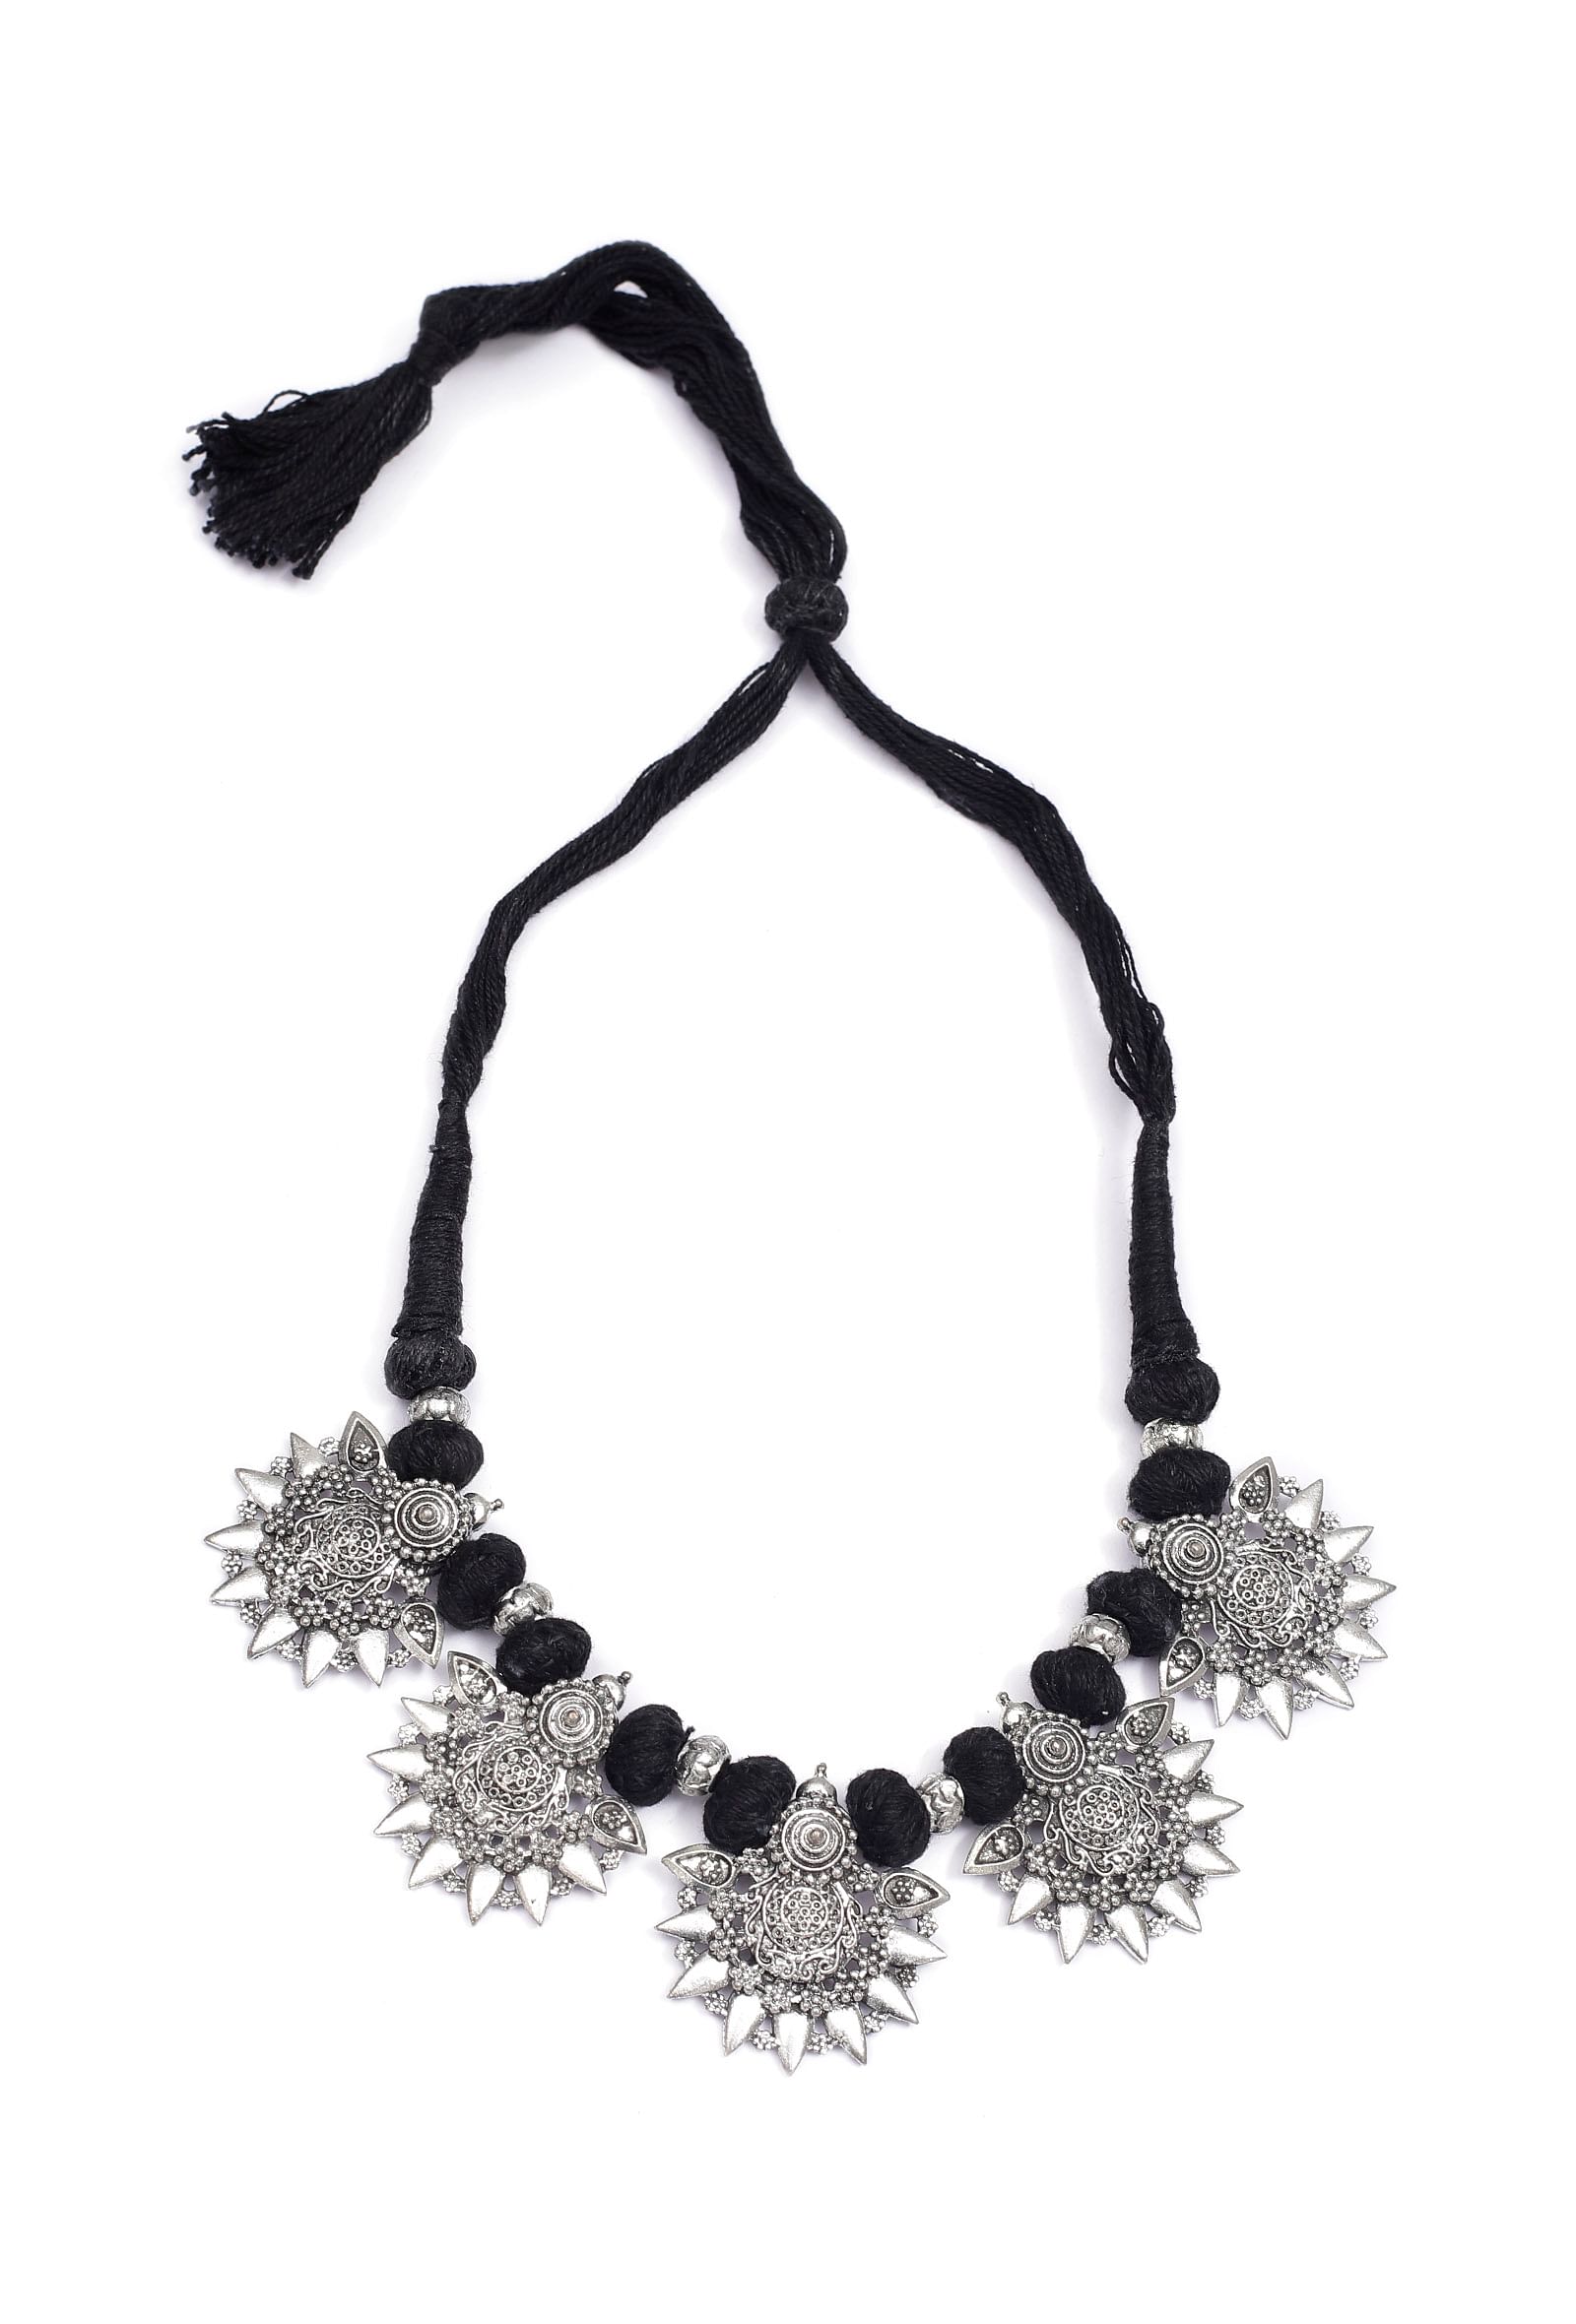 Black with Tribal Motif Necklace